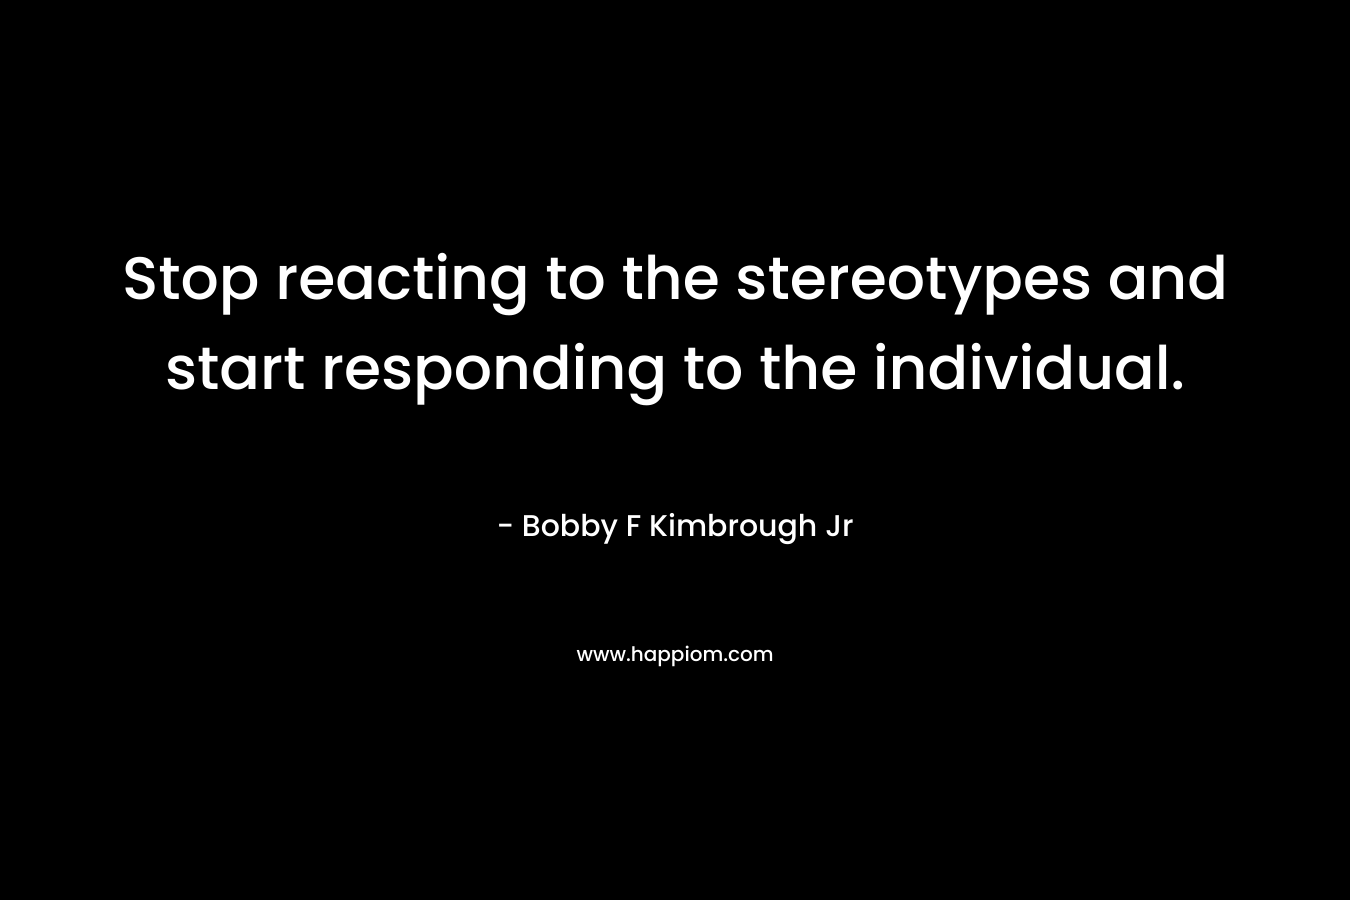 Stop reacting to the stereotypes and start responding to the individual. – Bobby F Kimbrough Jr